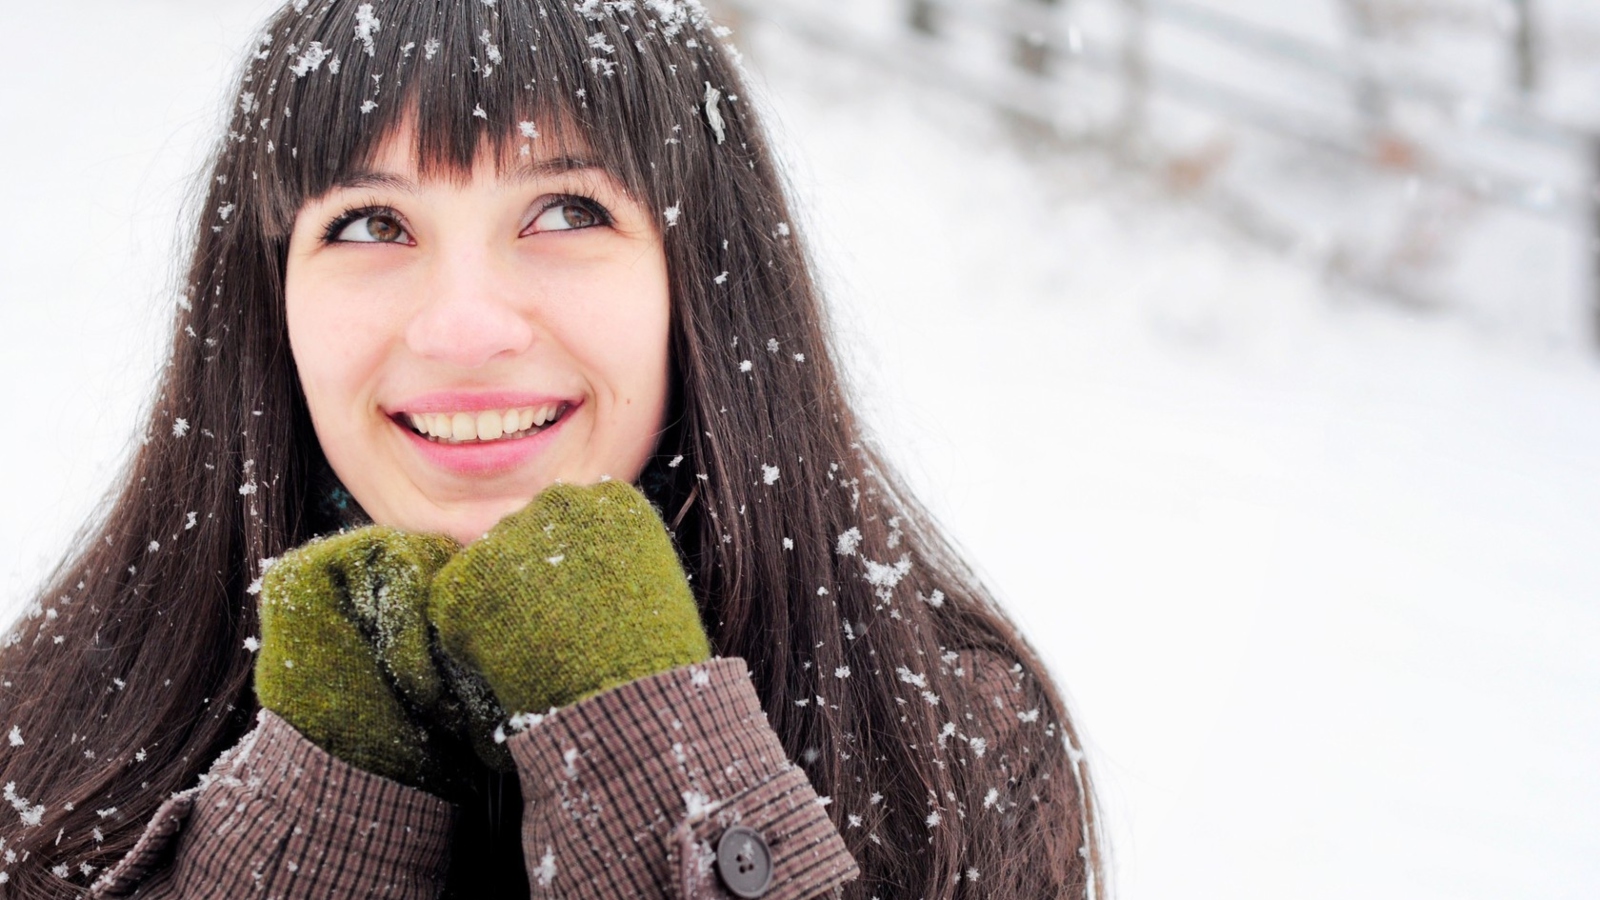 Brunette With Green Gloves In Snow wallpaper 1600x900